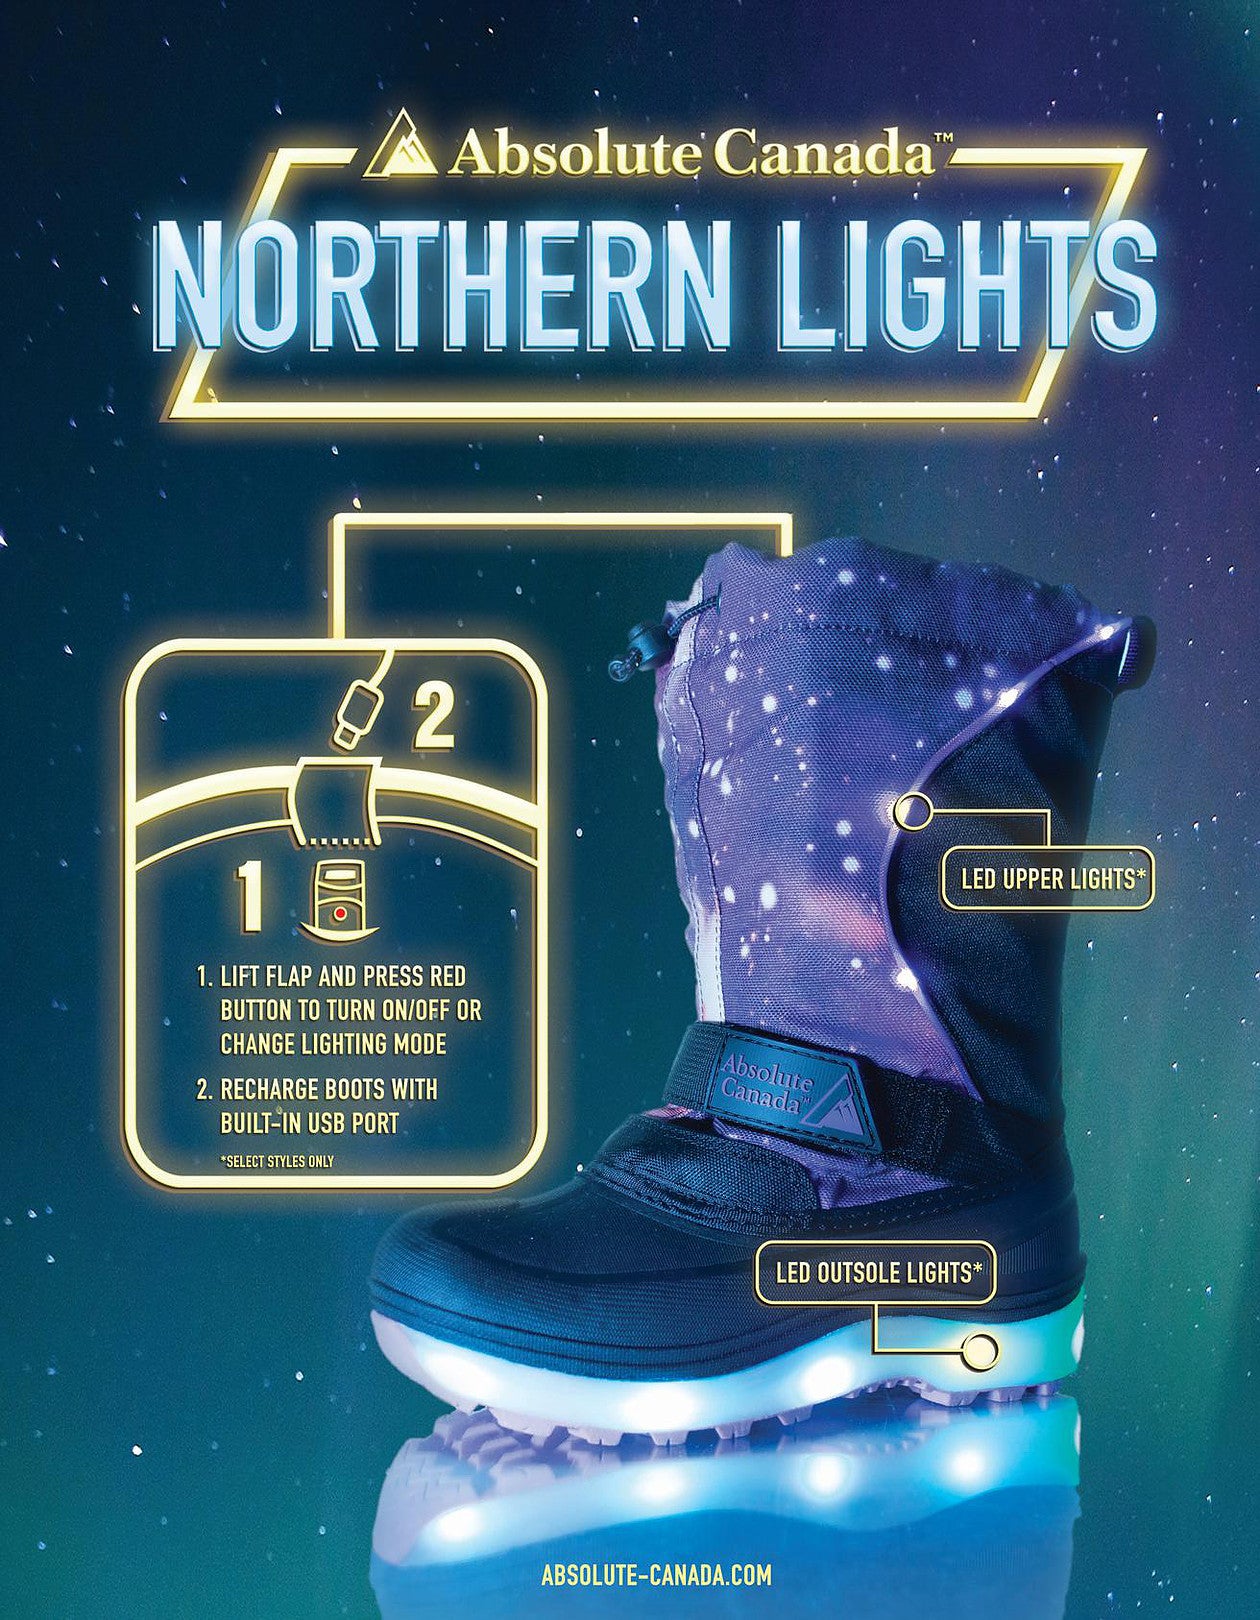 How To Operate The LED Lights In Your Boots